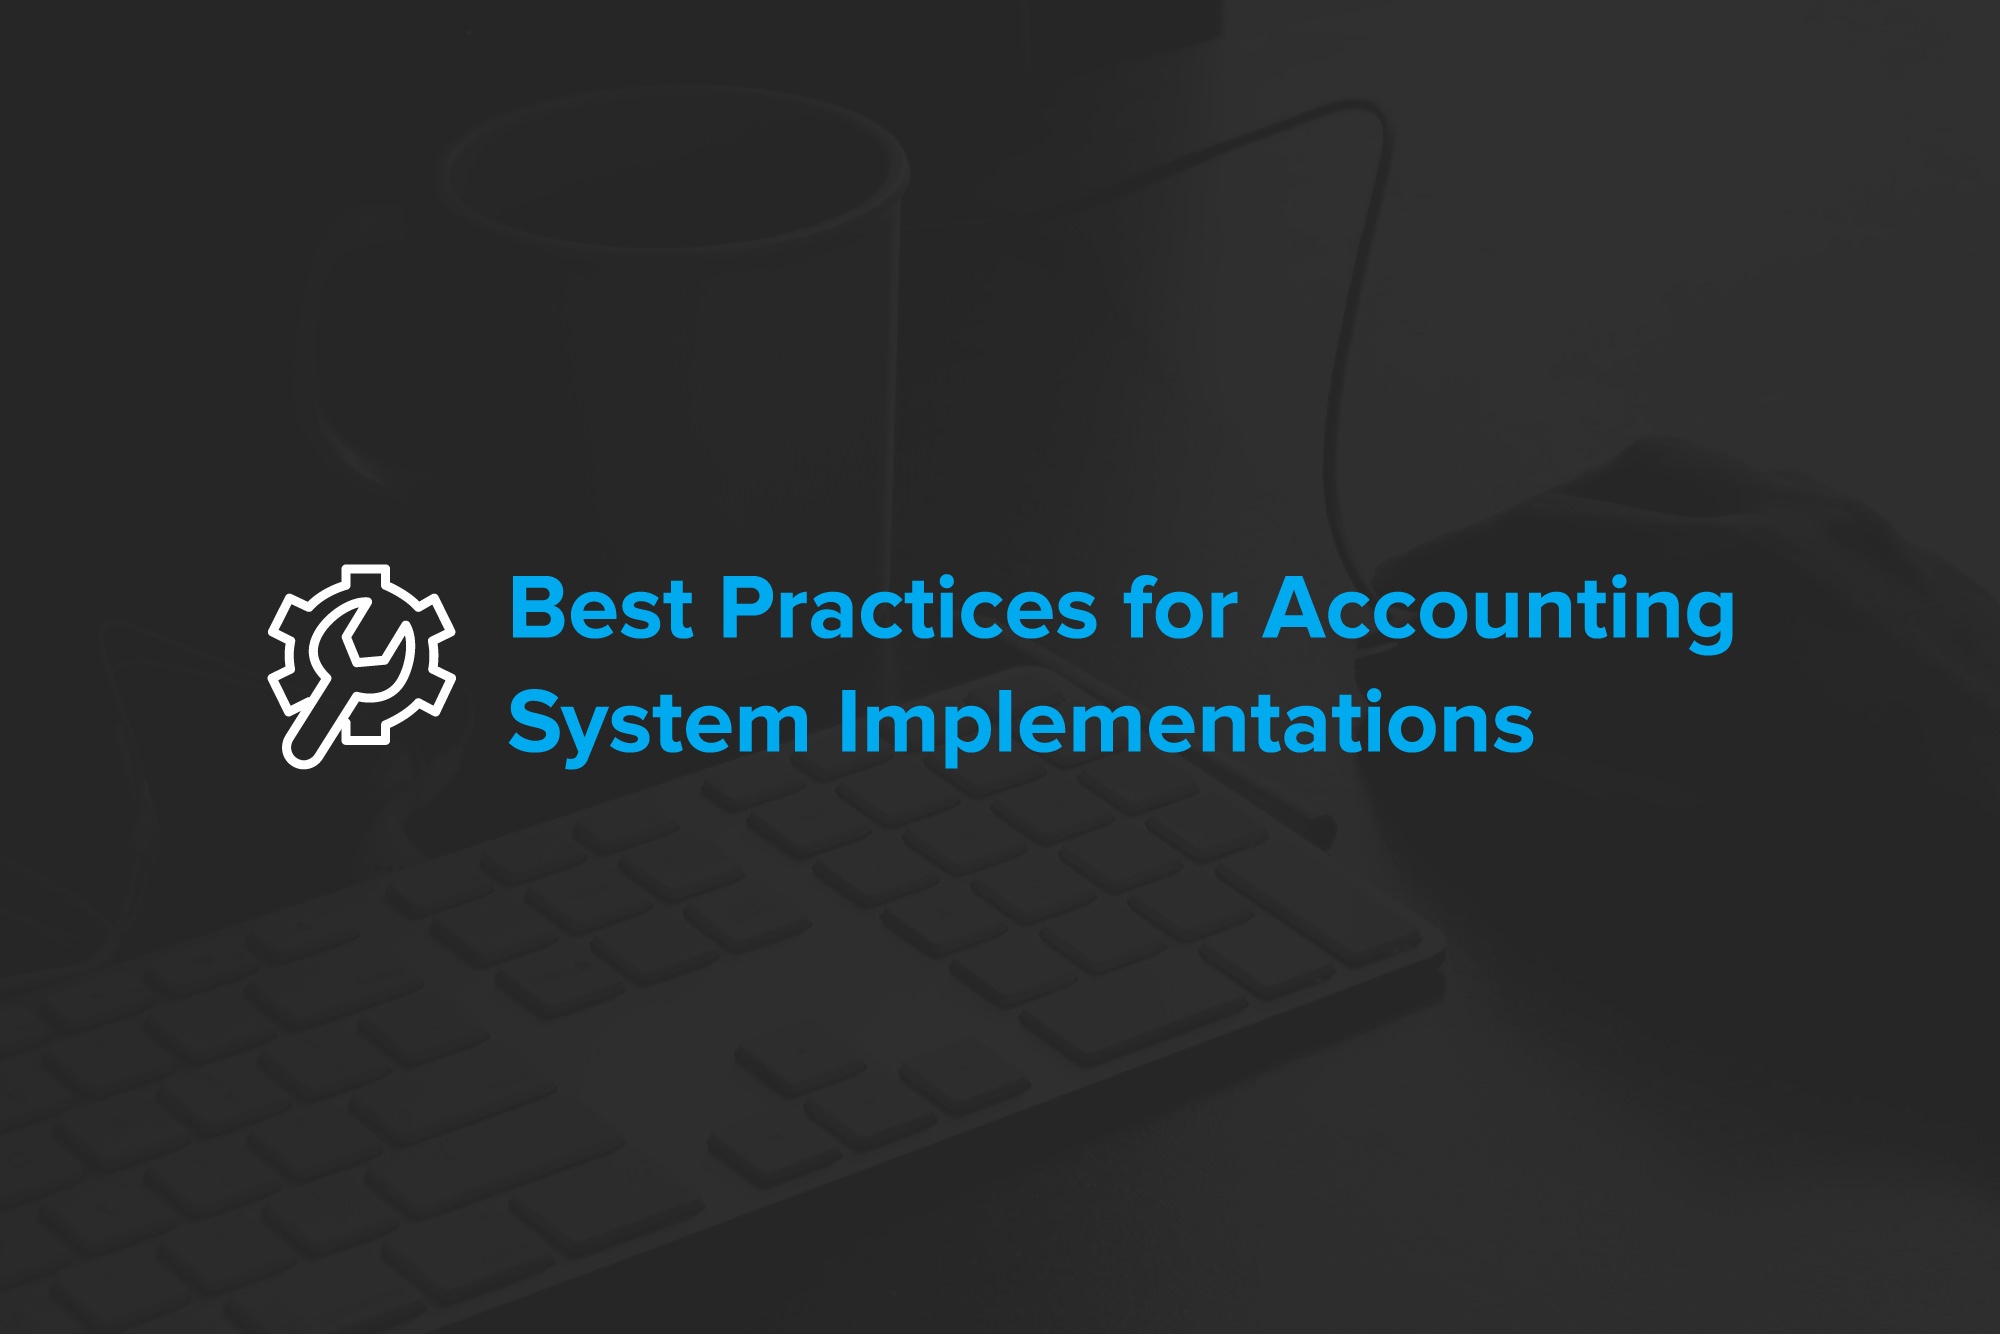 Best Practices for Accounting System Implementations